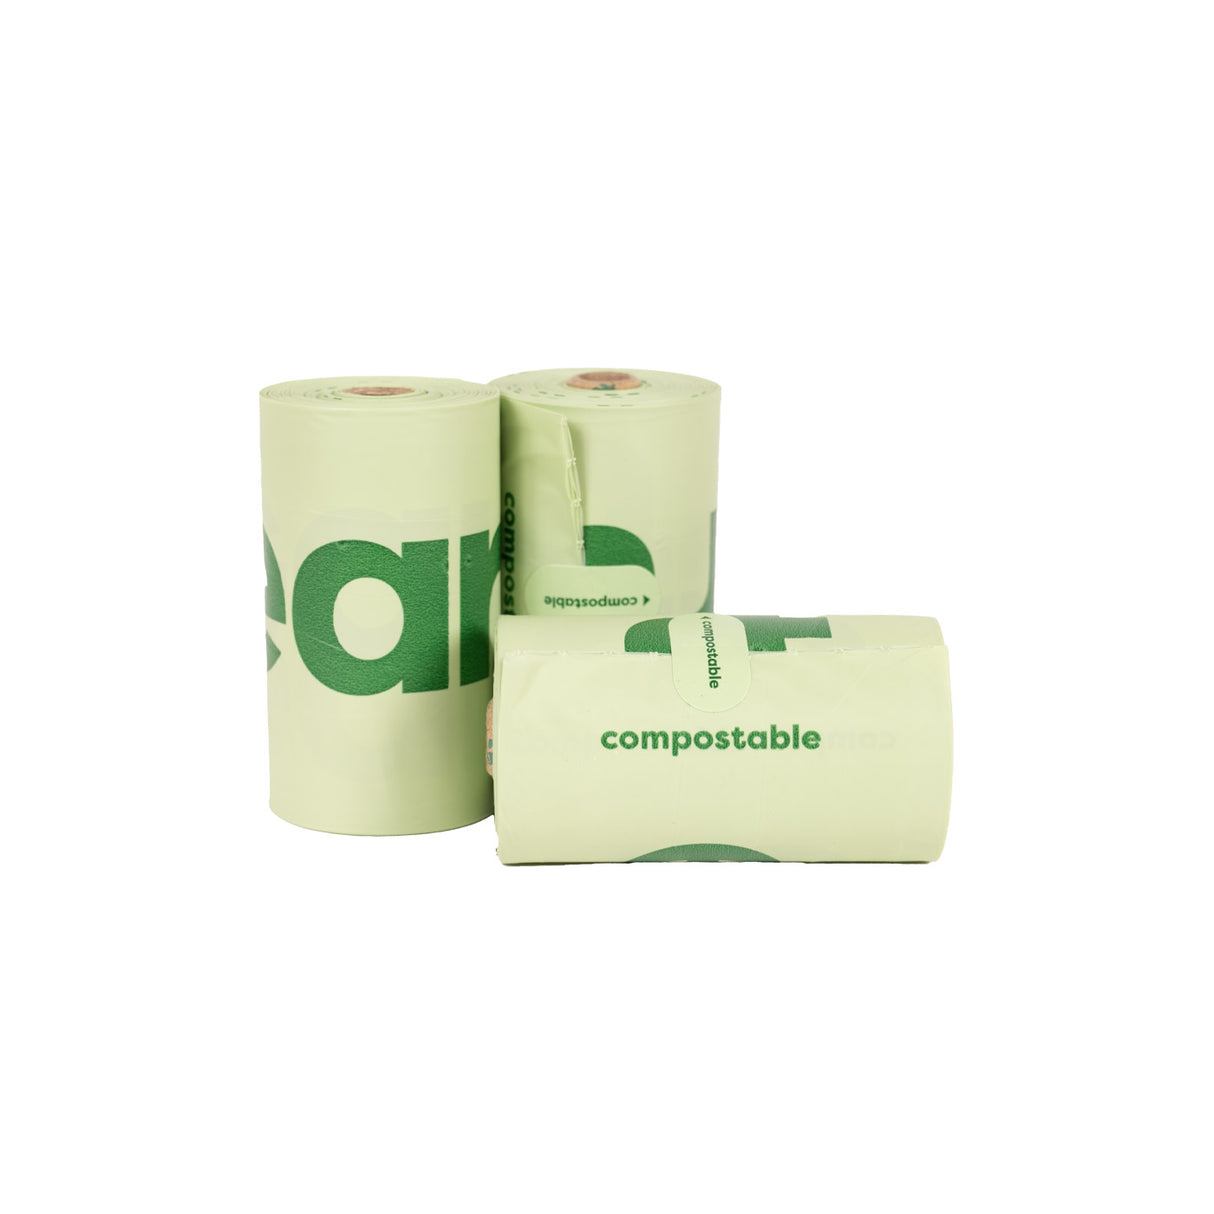 Earth Rated Certified Compostable Bags - Pack of 120